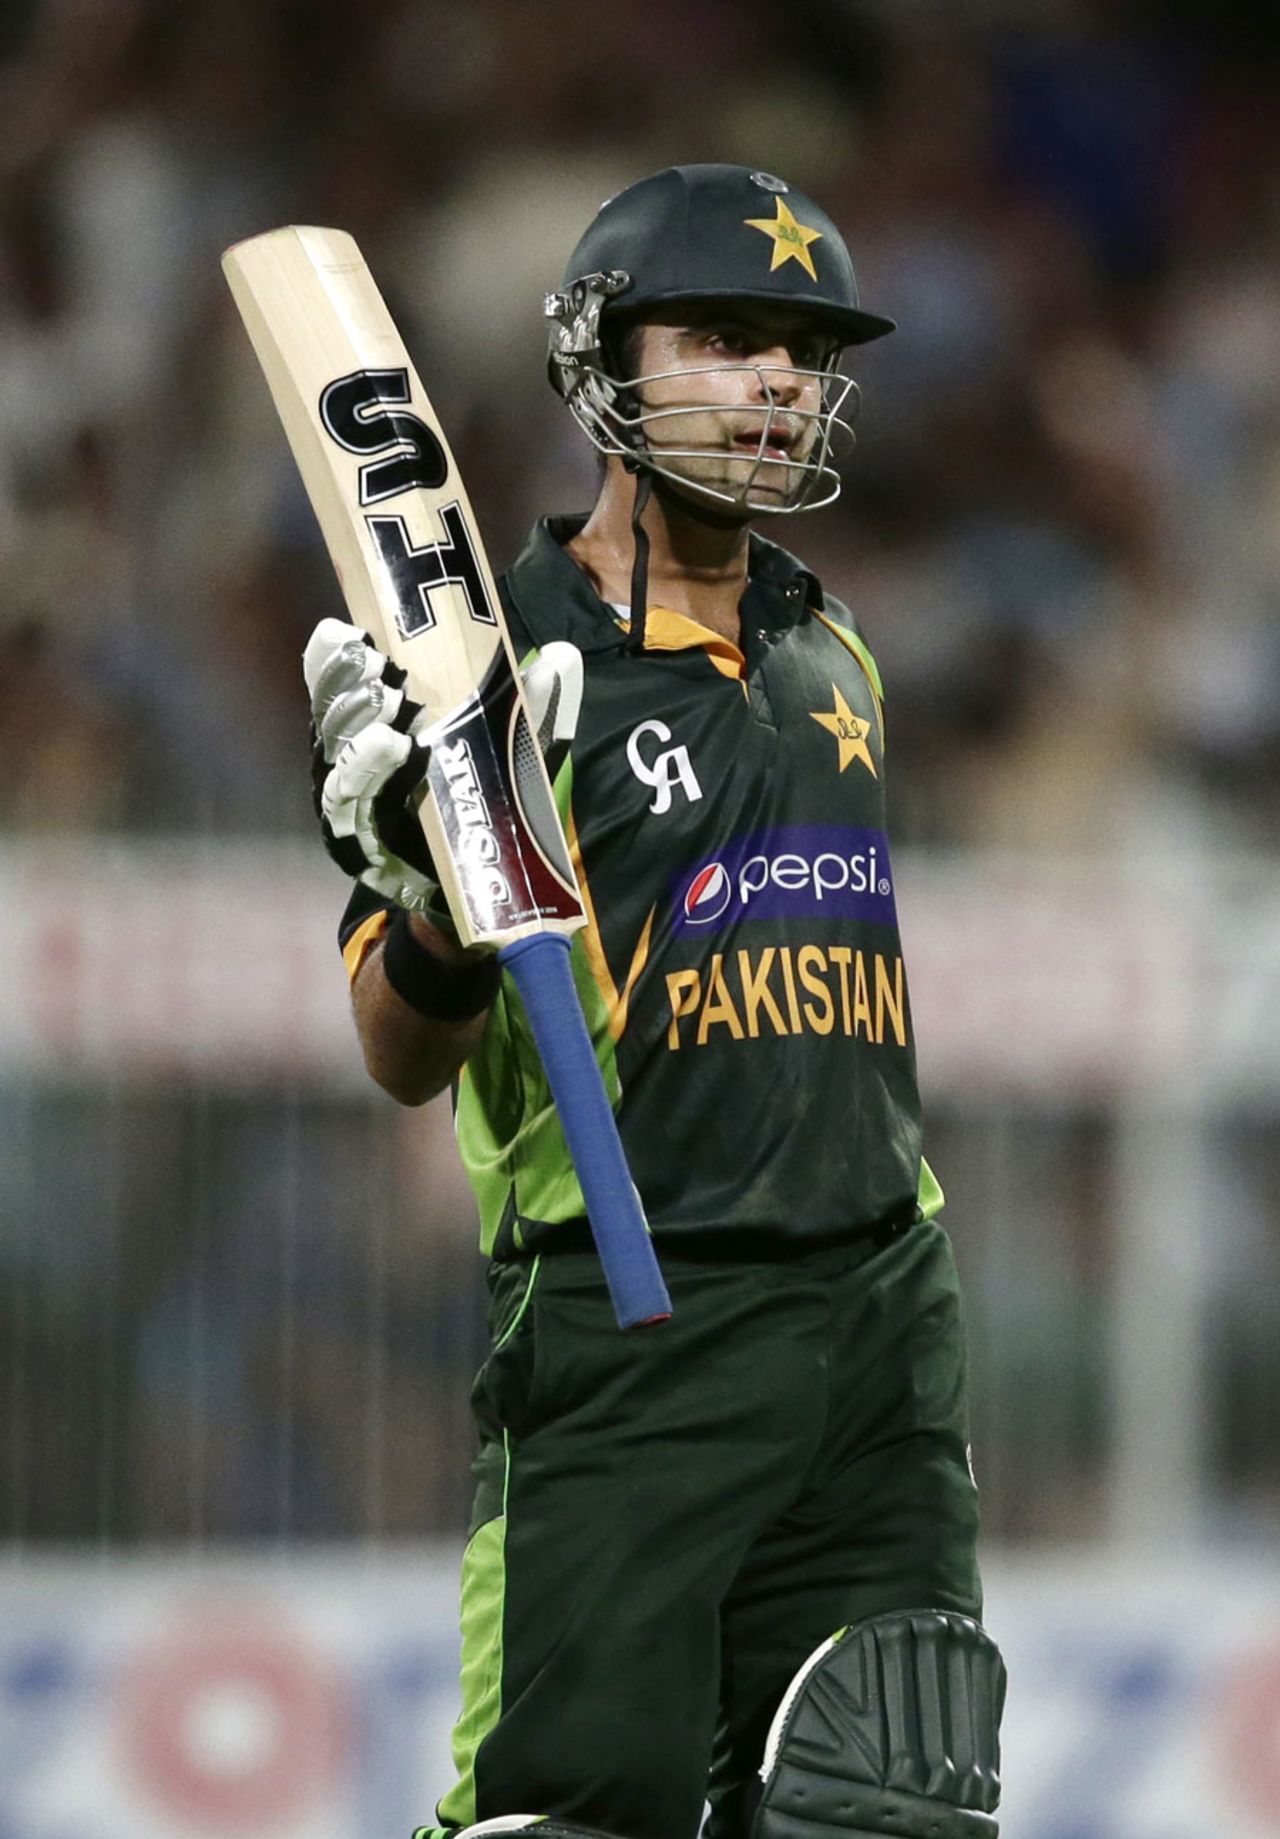 Ahmed Shehzad raises the bat after reaching his fifty, Pakistan v South Africa, 1st ODI, Sharjah, October 30, 2013